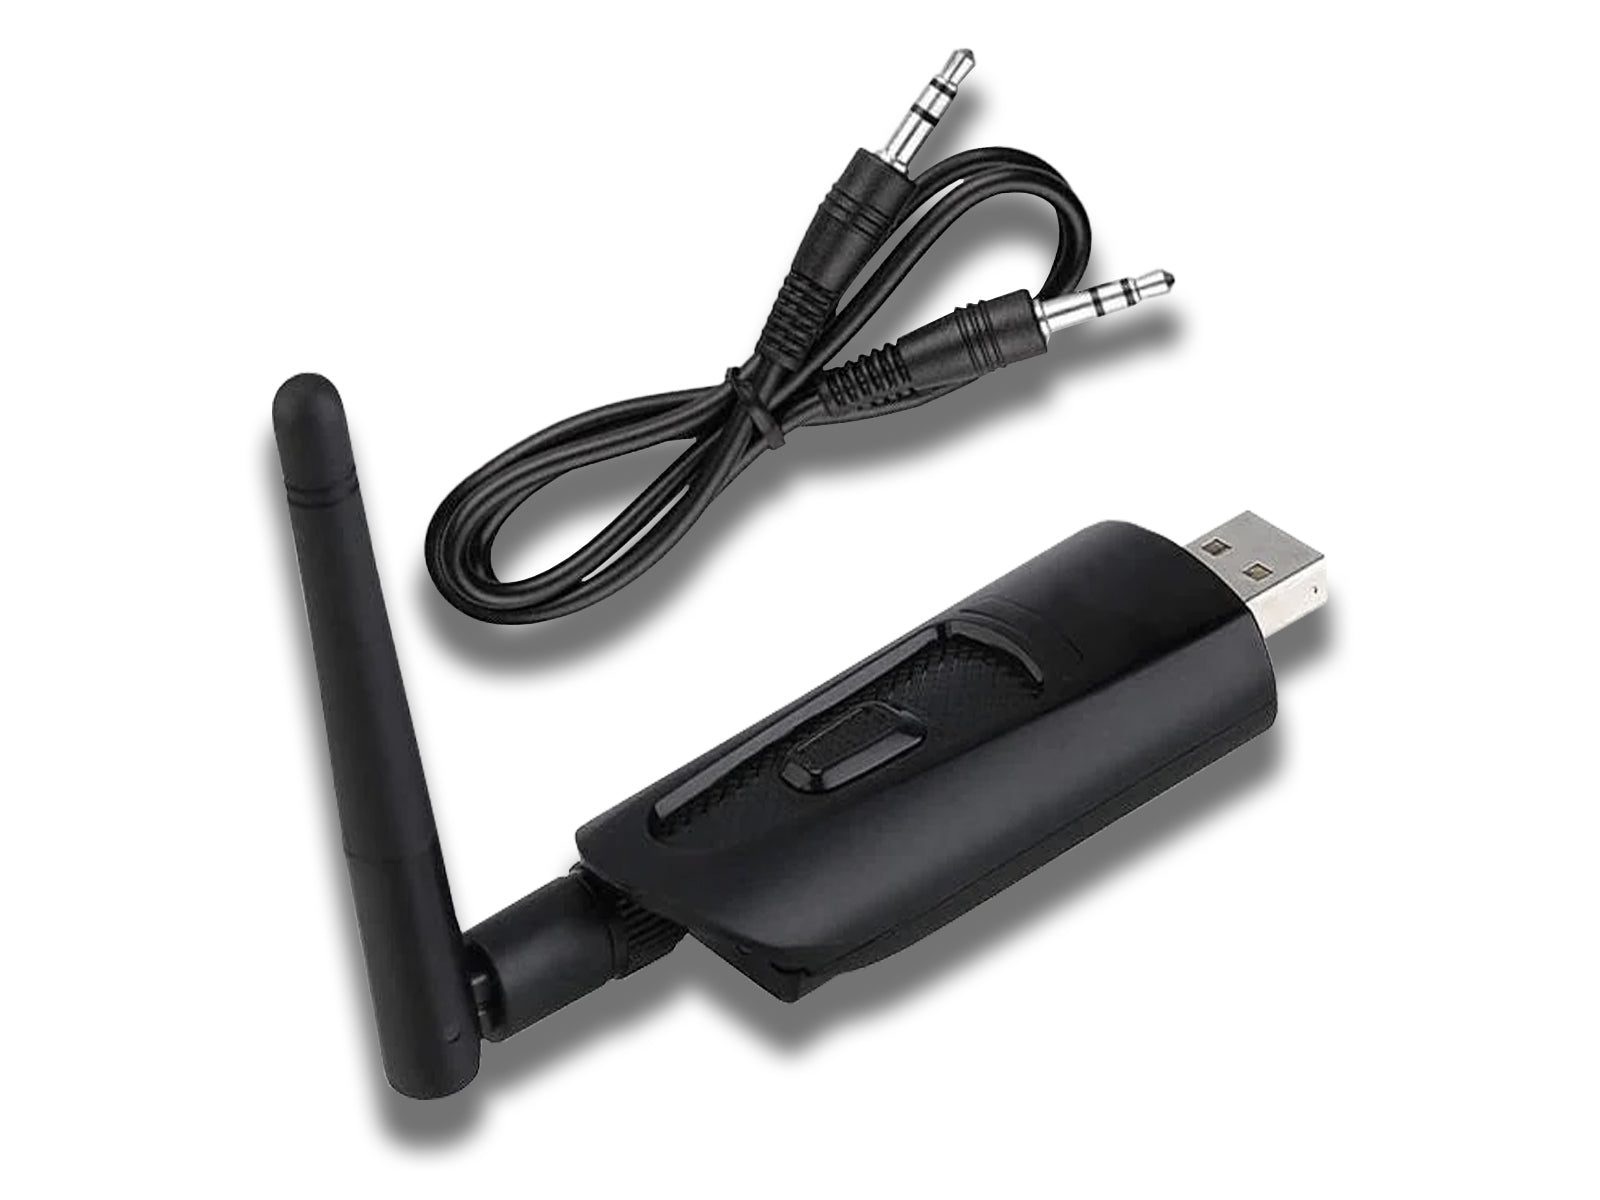 RCA Bluetooth Transmitter Showing Both The Aux Cable & Transmitter USB Connection